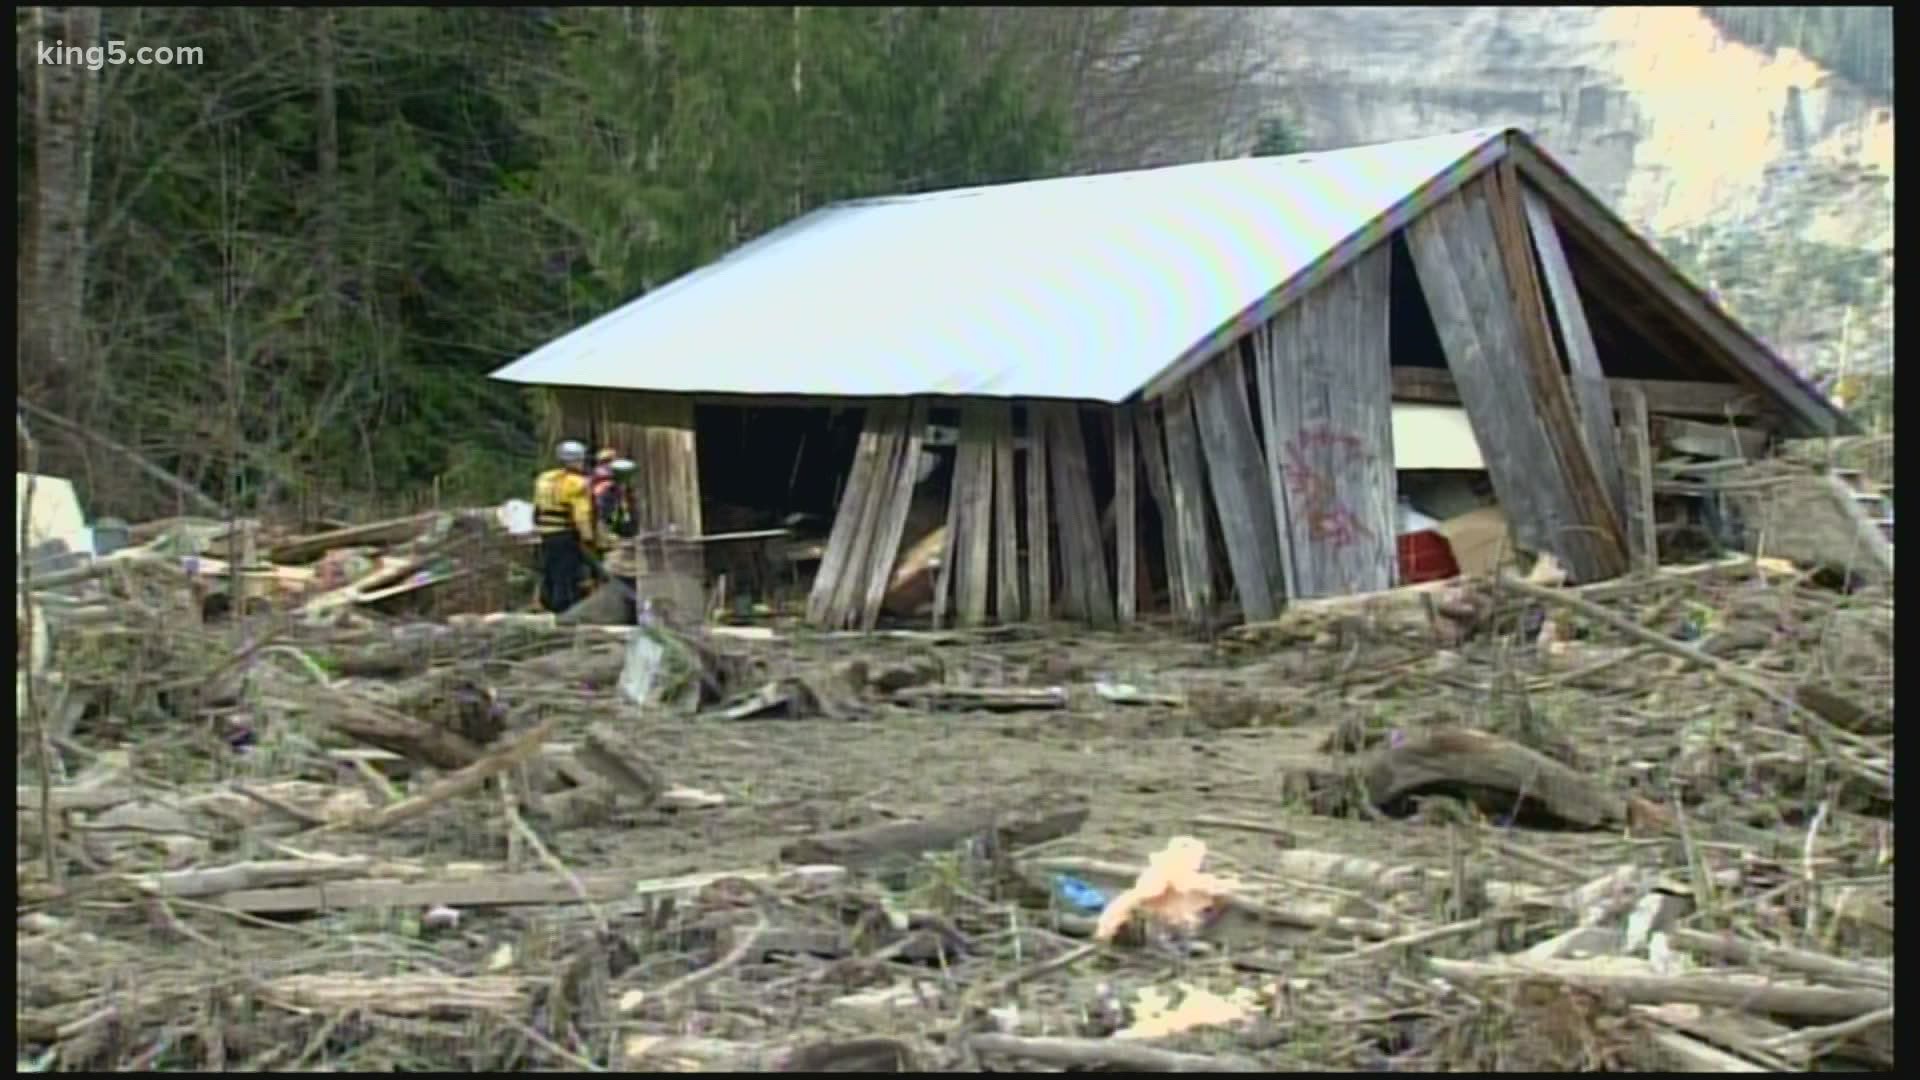 It's been more than six years since the deadly Oso landslide, but researchers are still studying the disaster for valuable safety tips.